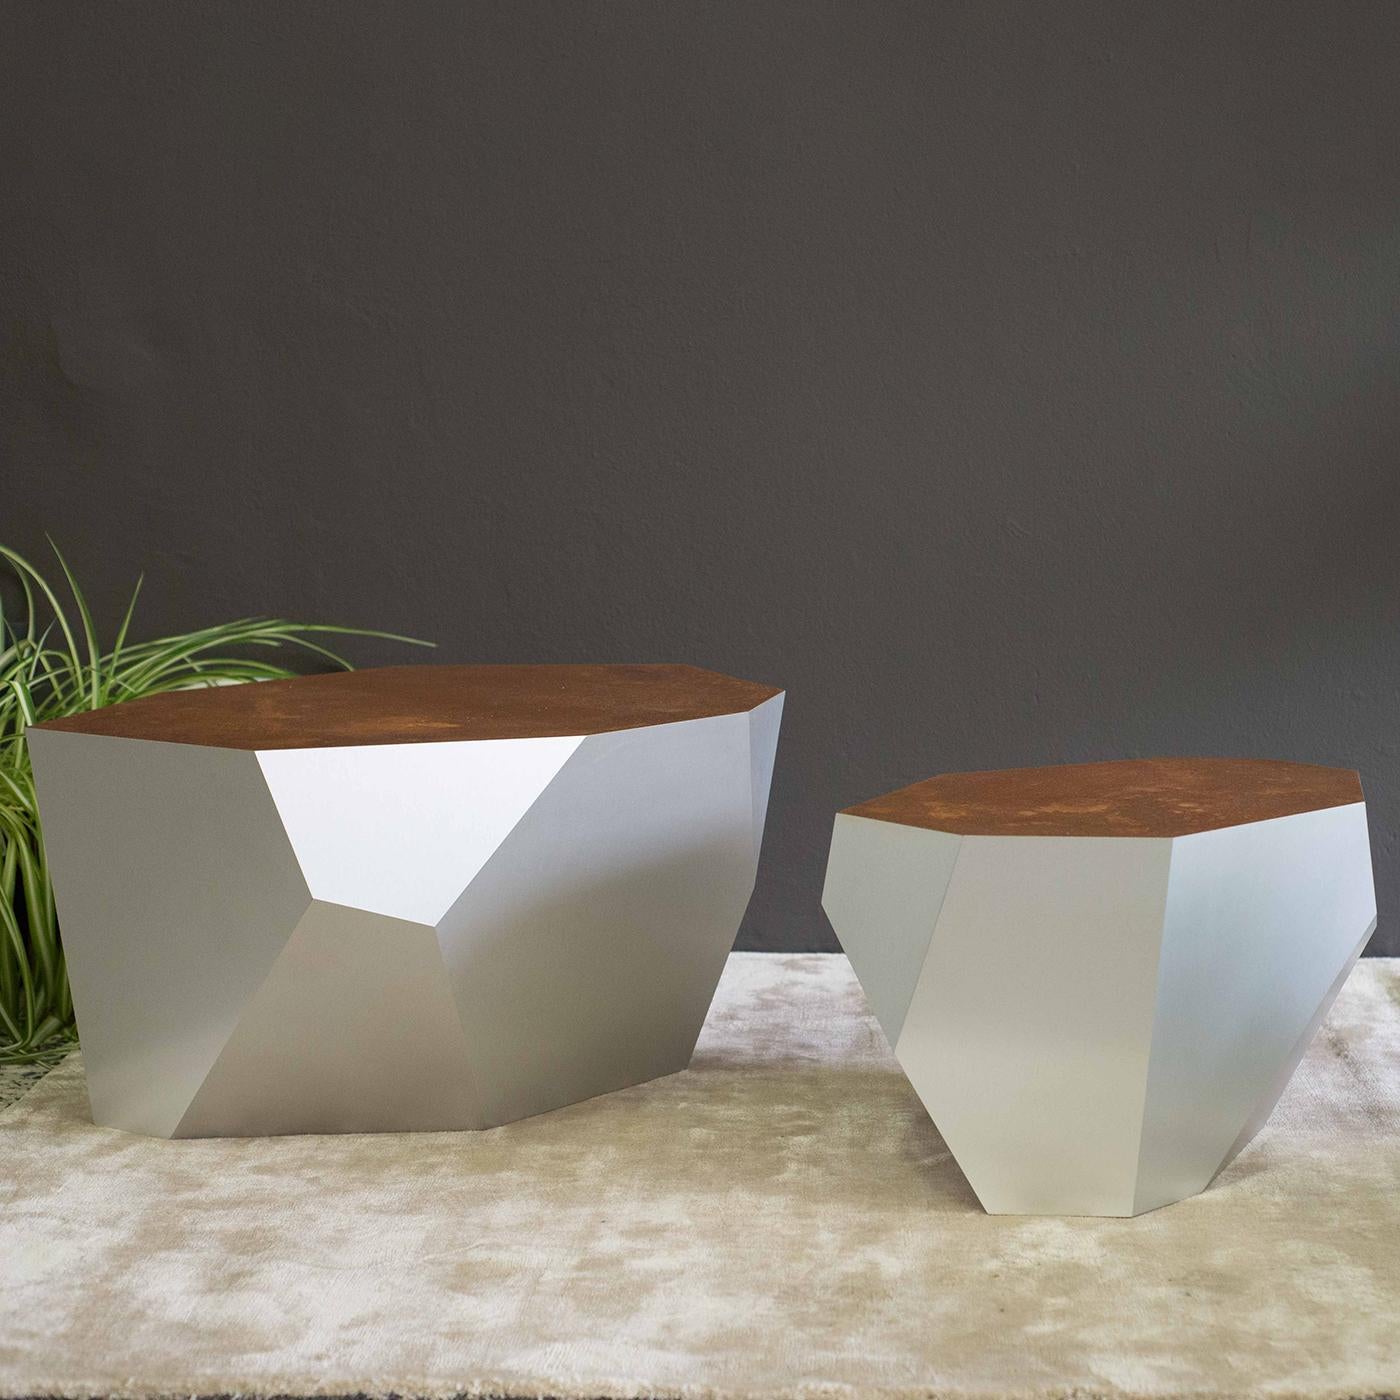 Aptly named for its distinctive geometric design, this coffee table from the Rock series has a faceted base in white anodized form-folded aluminum that perfectly showcases the rust-like weathered appearance of the corten steel top. Offering